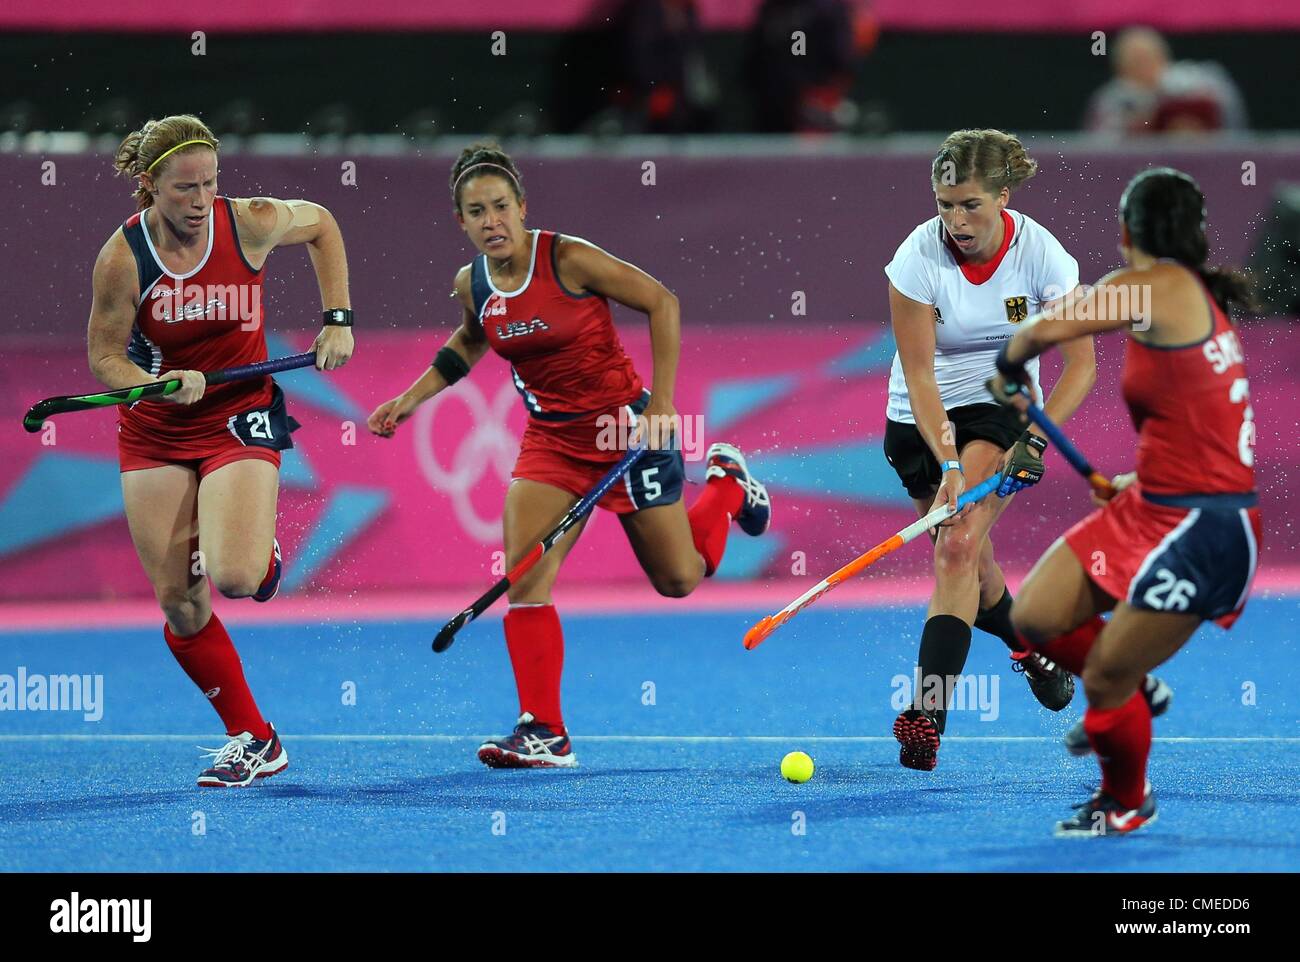 29.07.2012. London, England. Germany's Natascha Keller (2nd R) competes with Claire Laubach (L), Melissa Gonzalez (2nd L) and Kayla Bashore Smedley (R) of United States during women's field hockey at Olympic Park Riverbank Arena for the London 2012 Olympic Games, London, Britain, 29 July 2012. Stock Photo